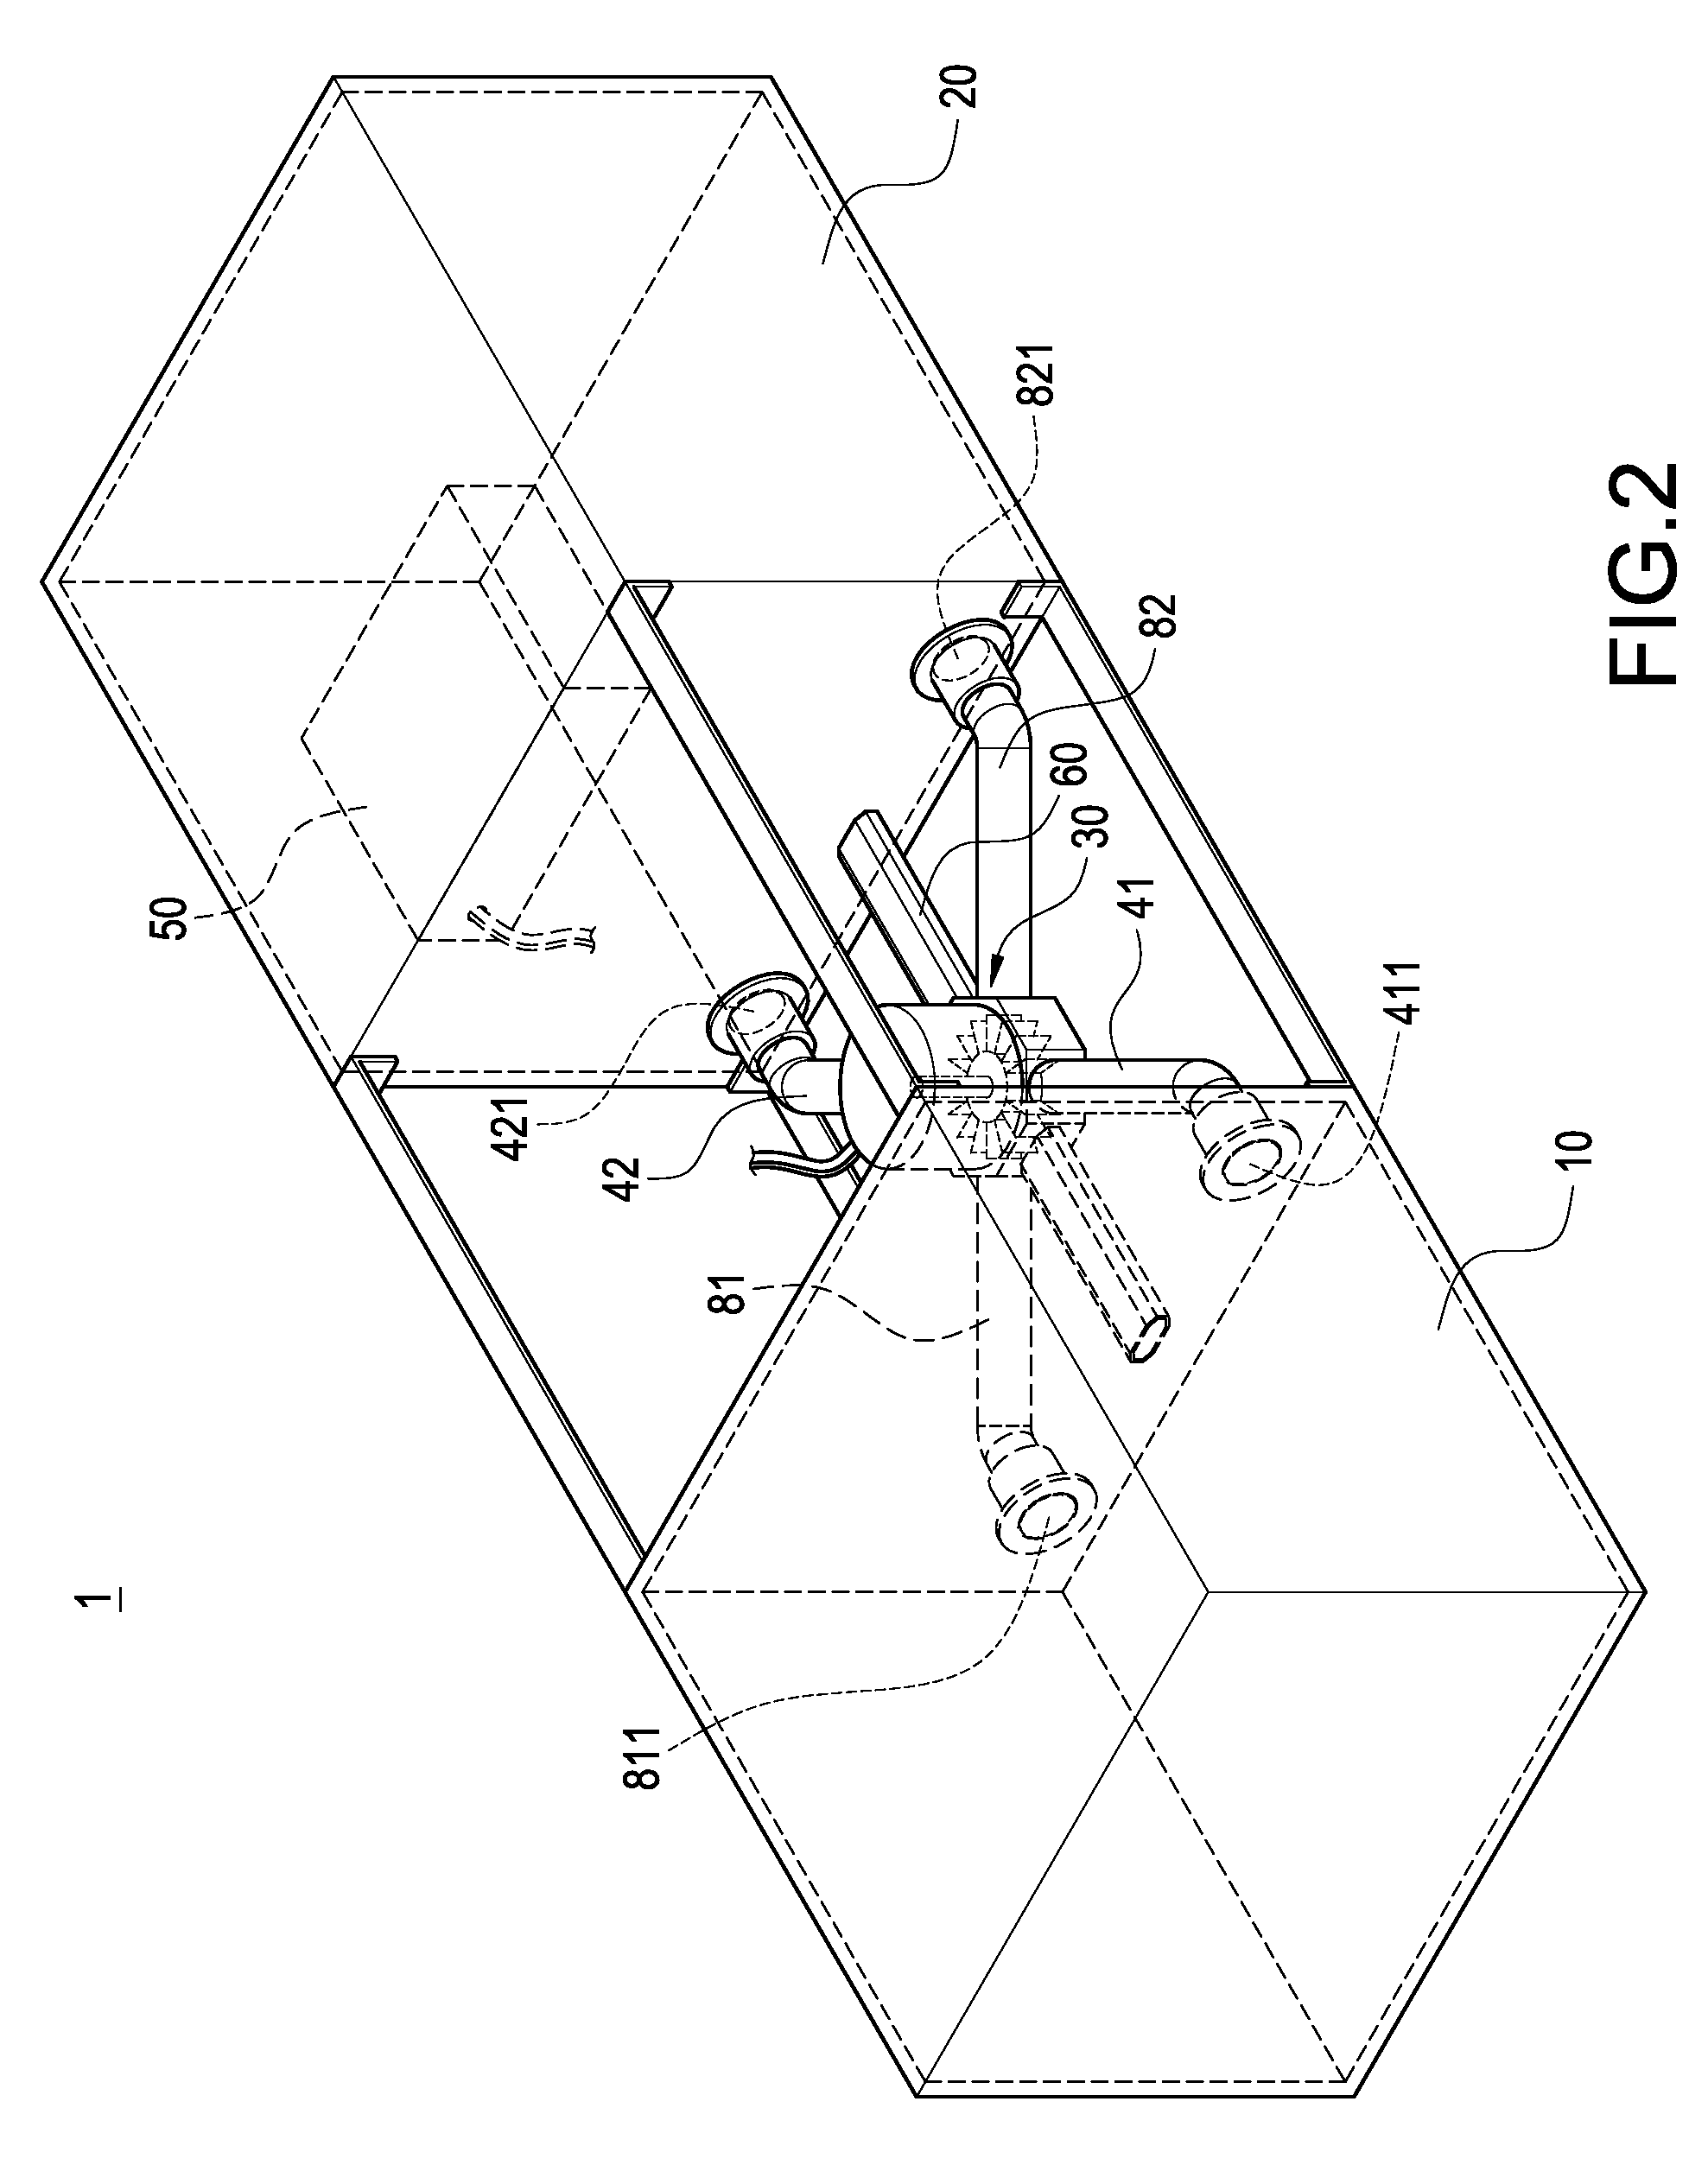 Seesaw-type wave power generating device